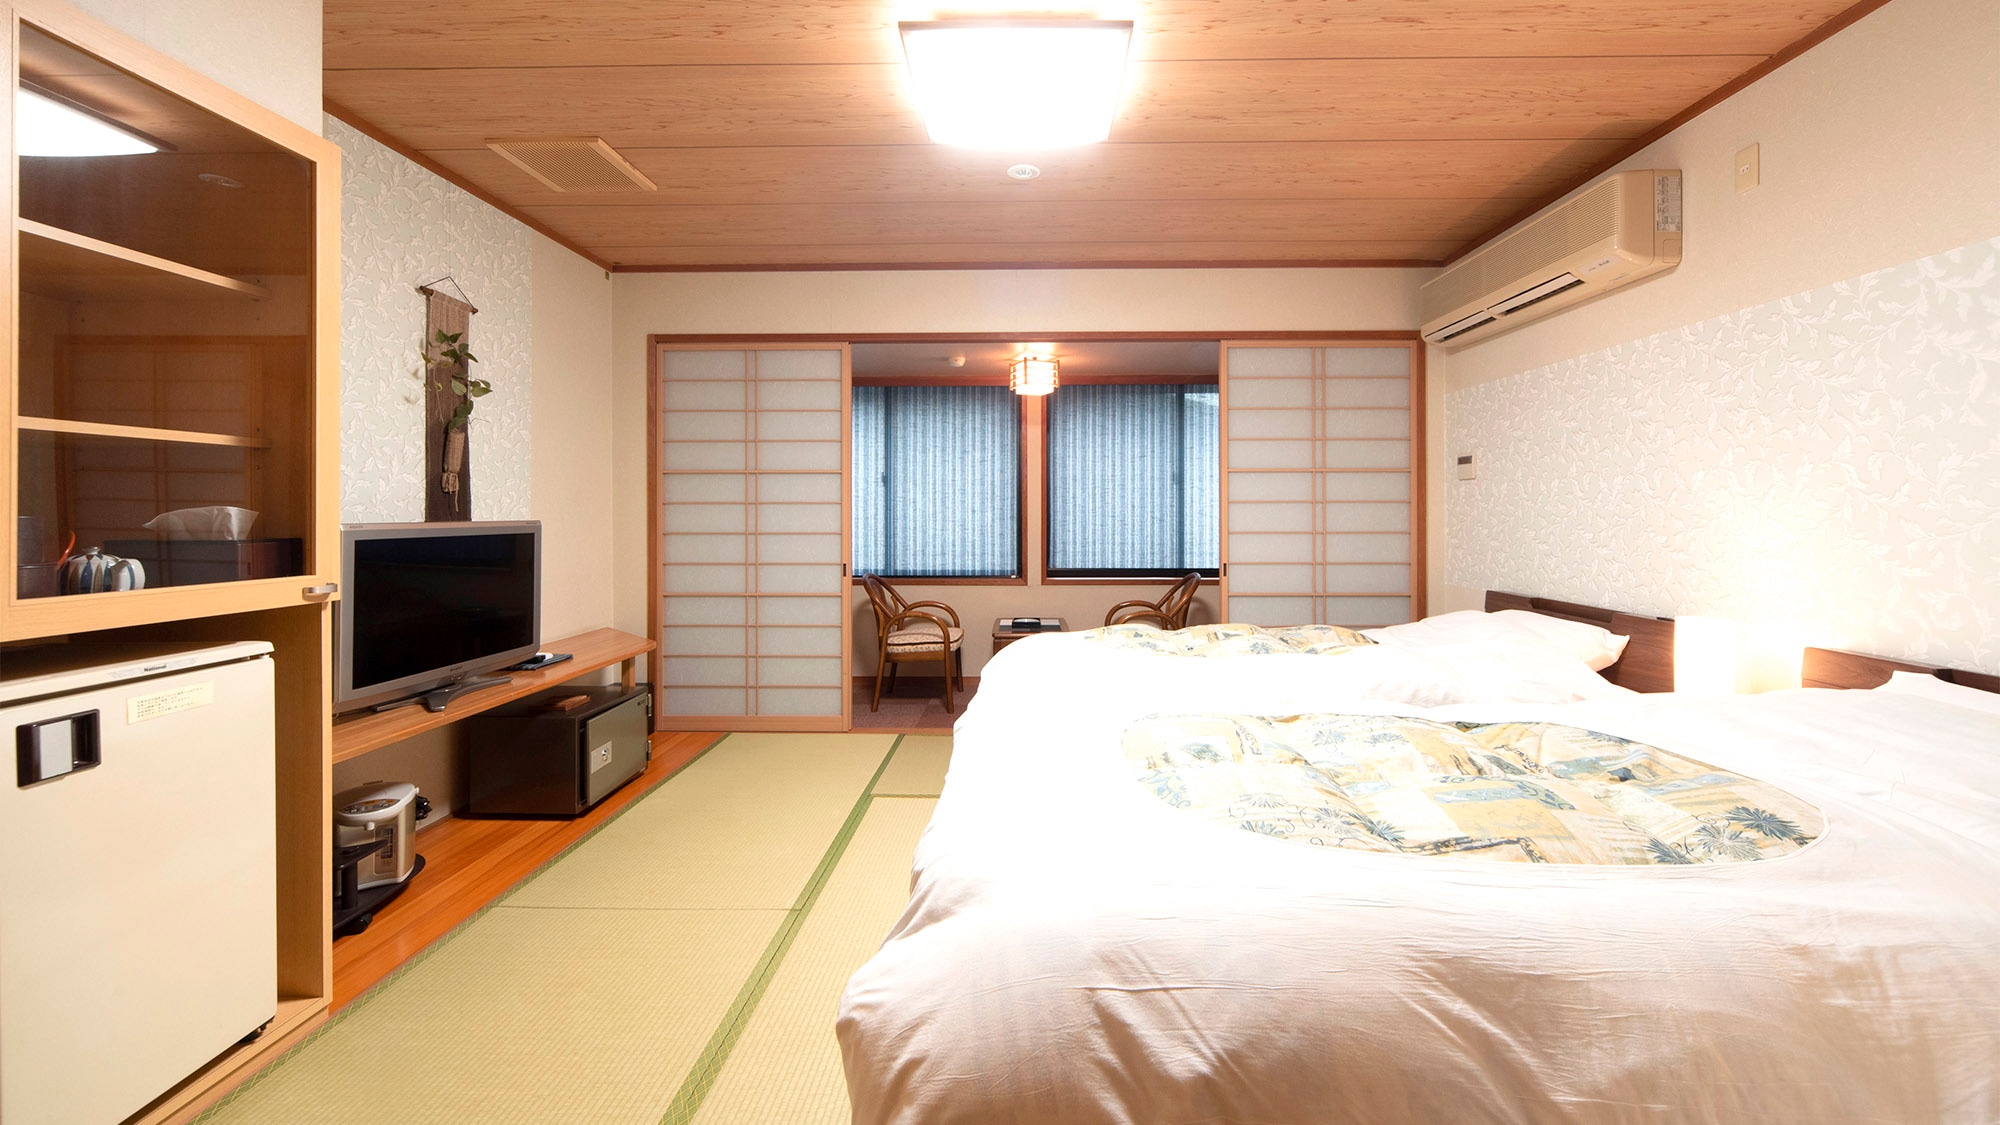 ・ Relax on the tatami mats and relax on the bed.